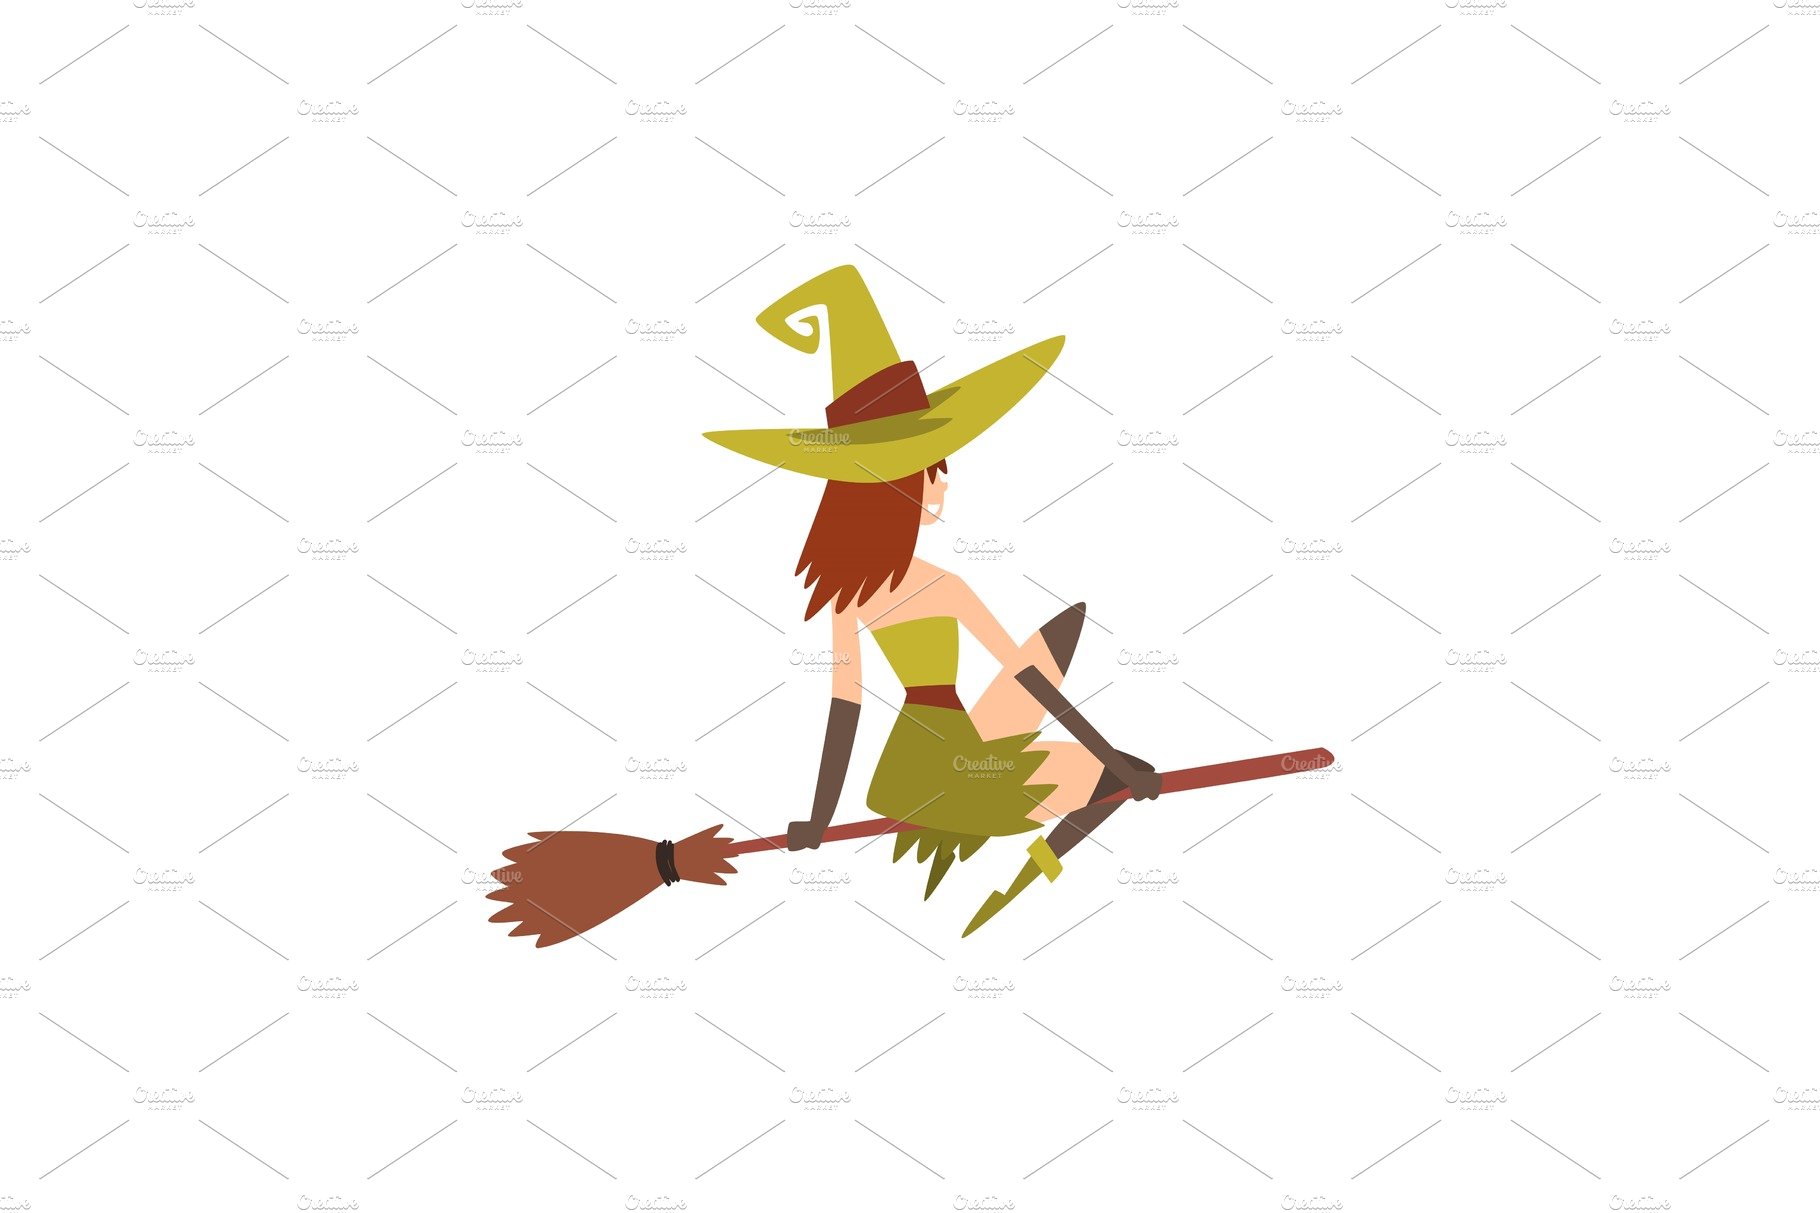 Beautiful Witch Flying on Broom cover image.